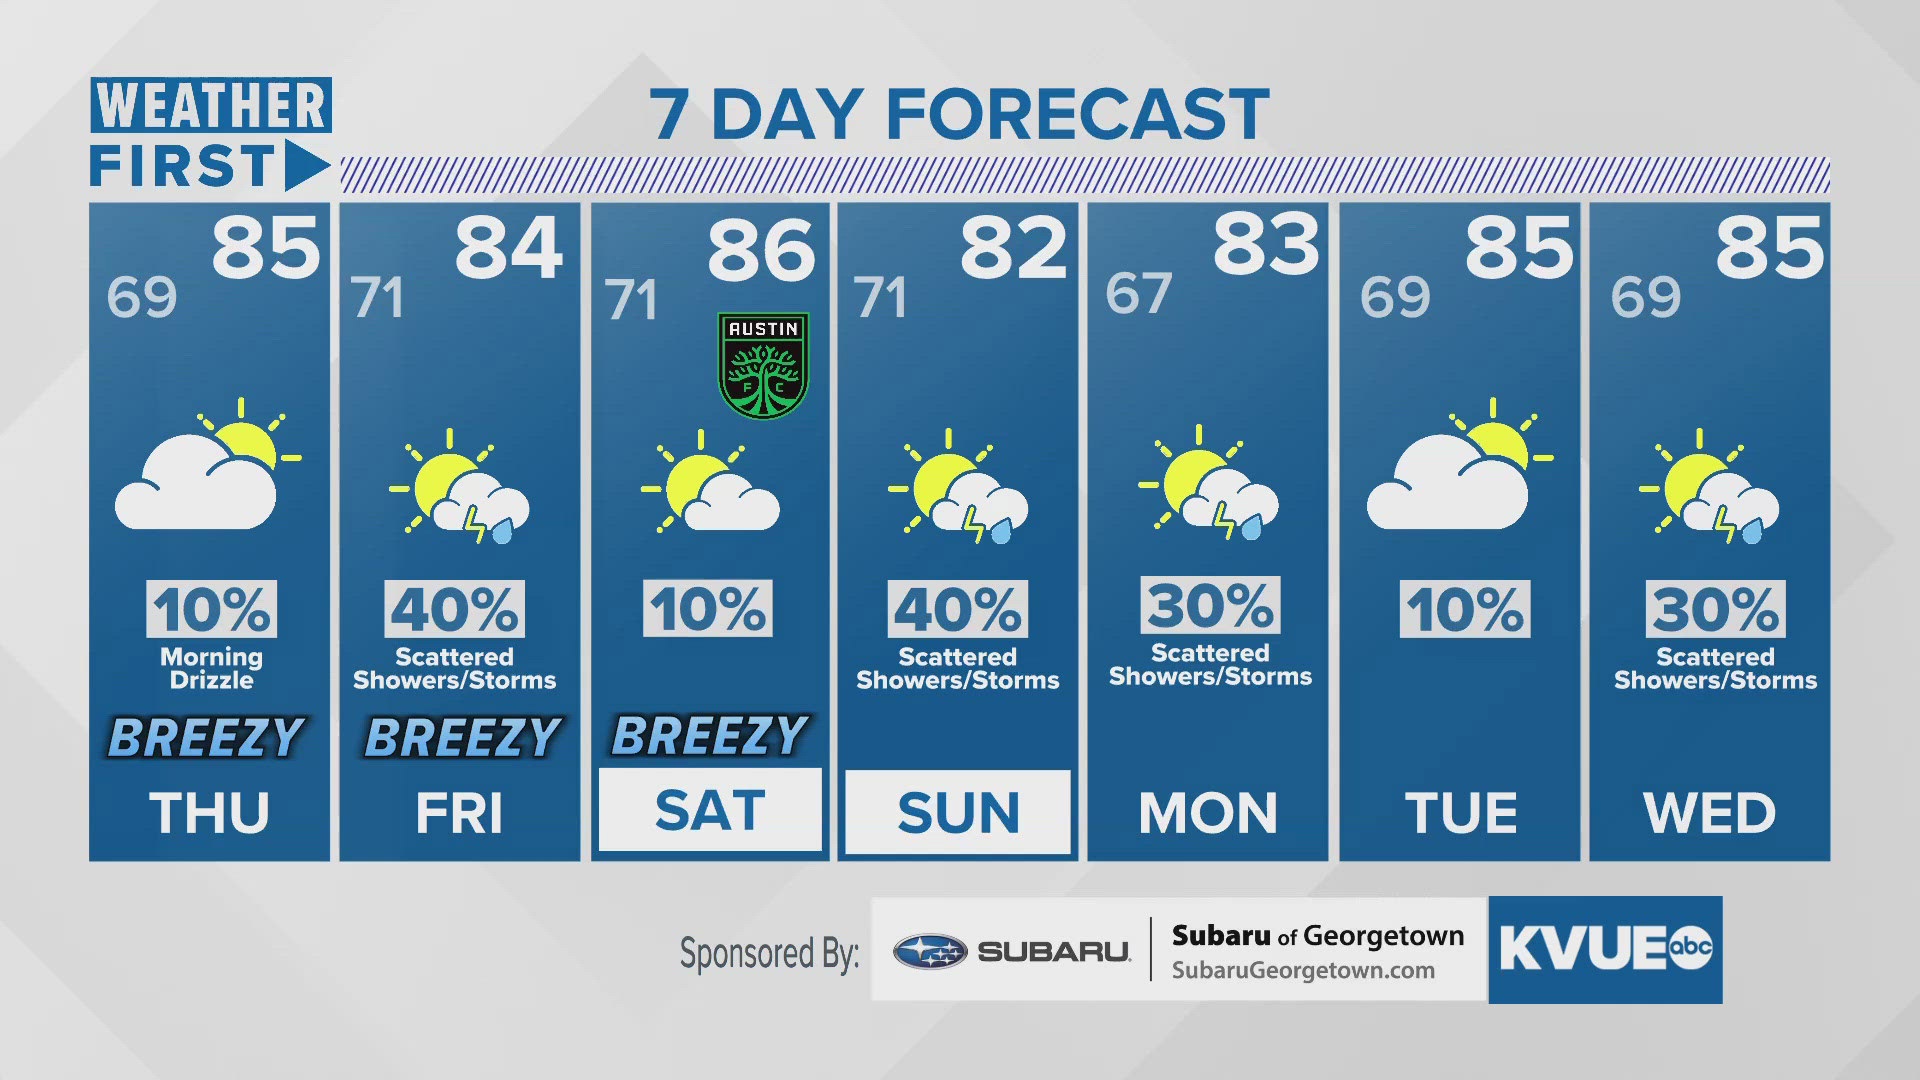 Scattered storms Friday and Sunday